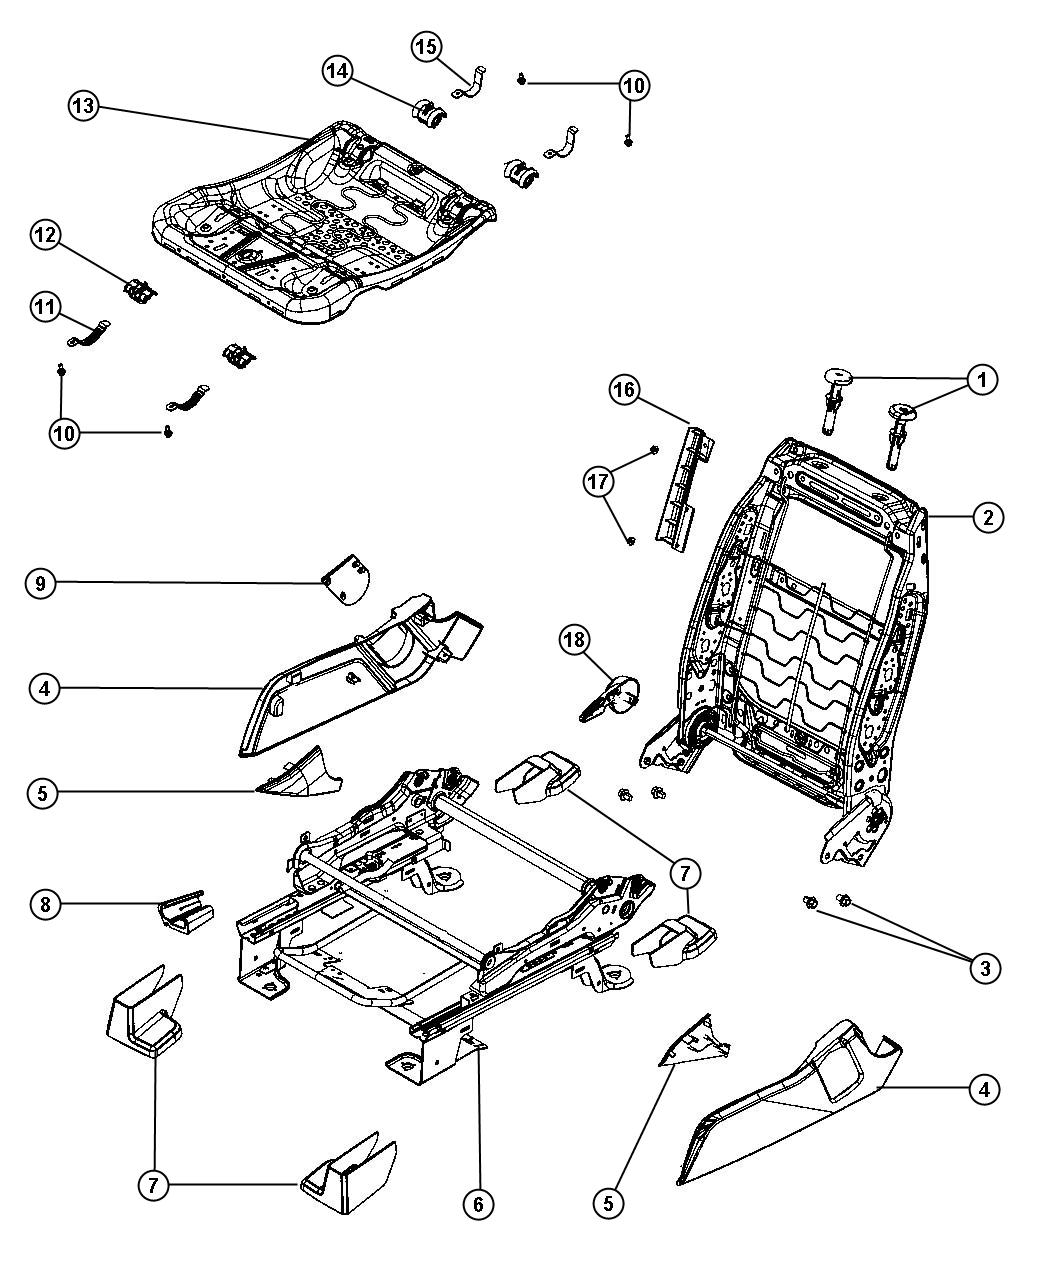 Adjusters, Recliners and Shields - Passenger Seat - Manual - Non-Fold Flat. Diagram